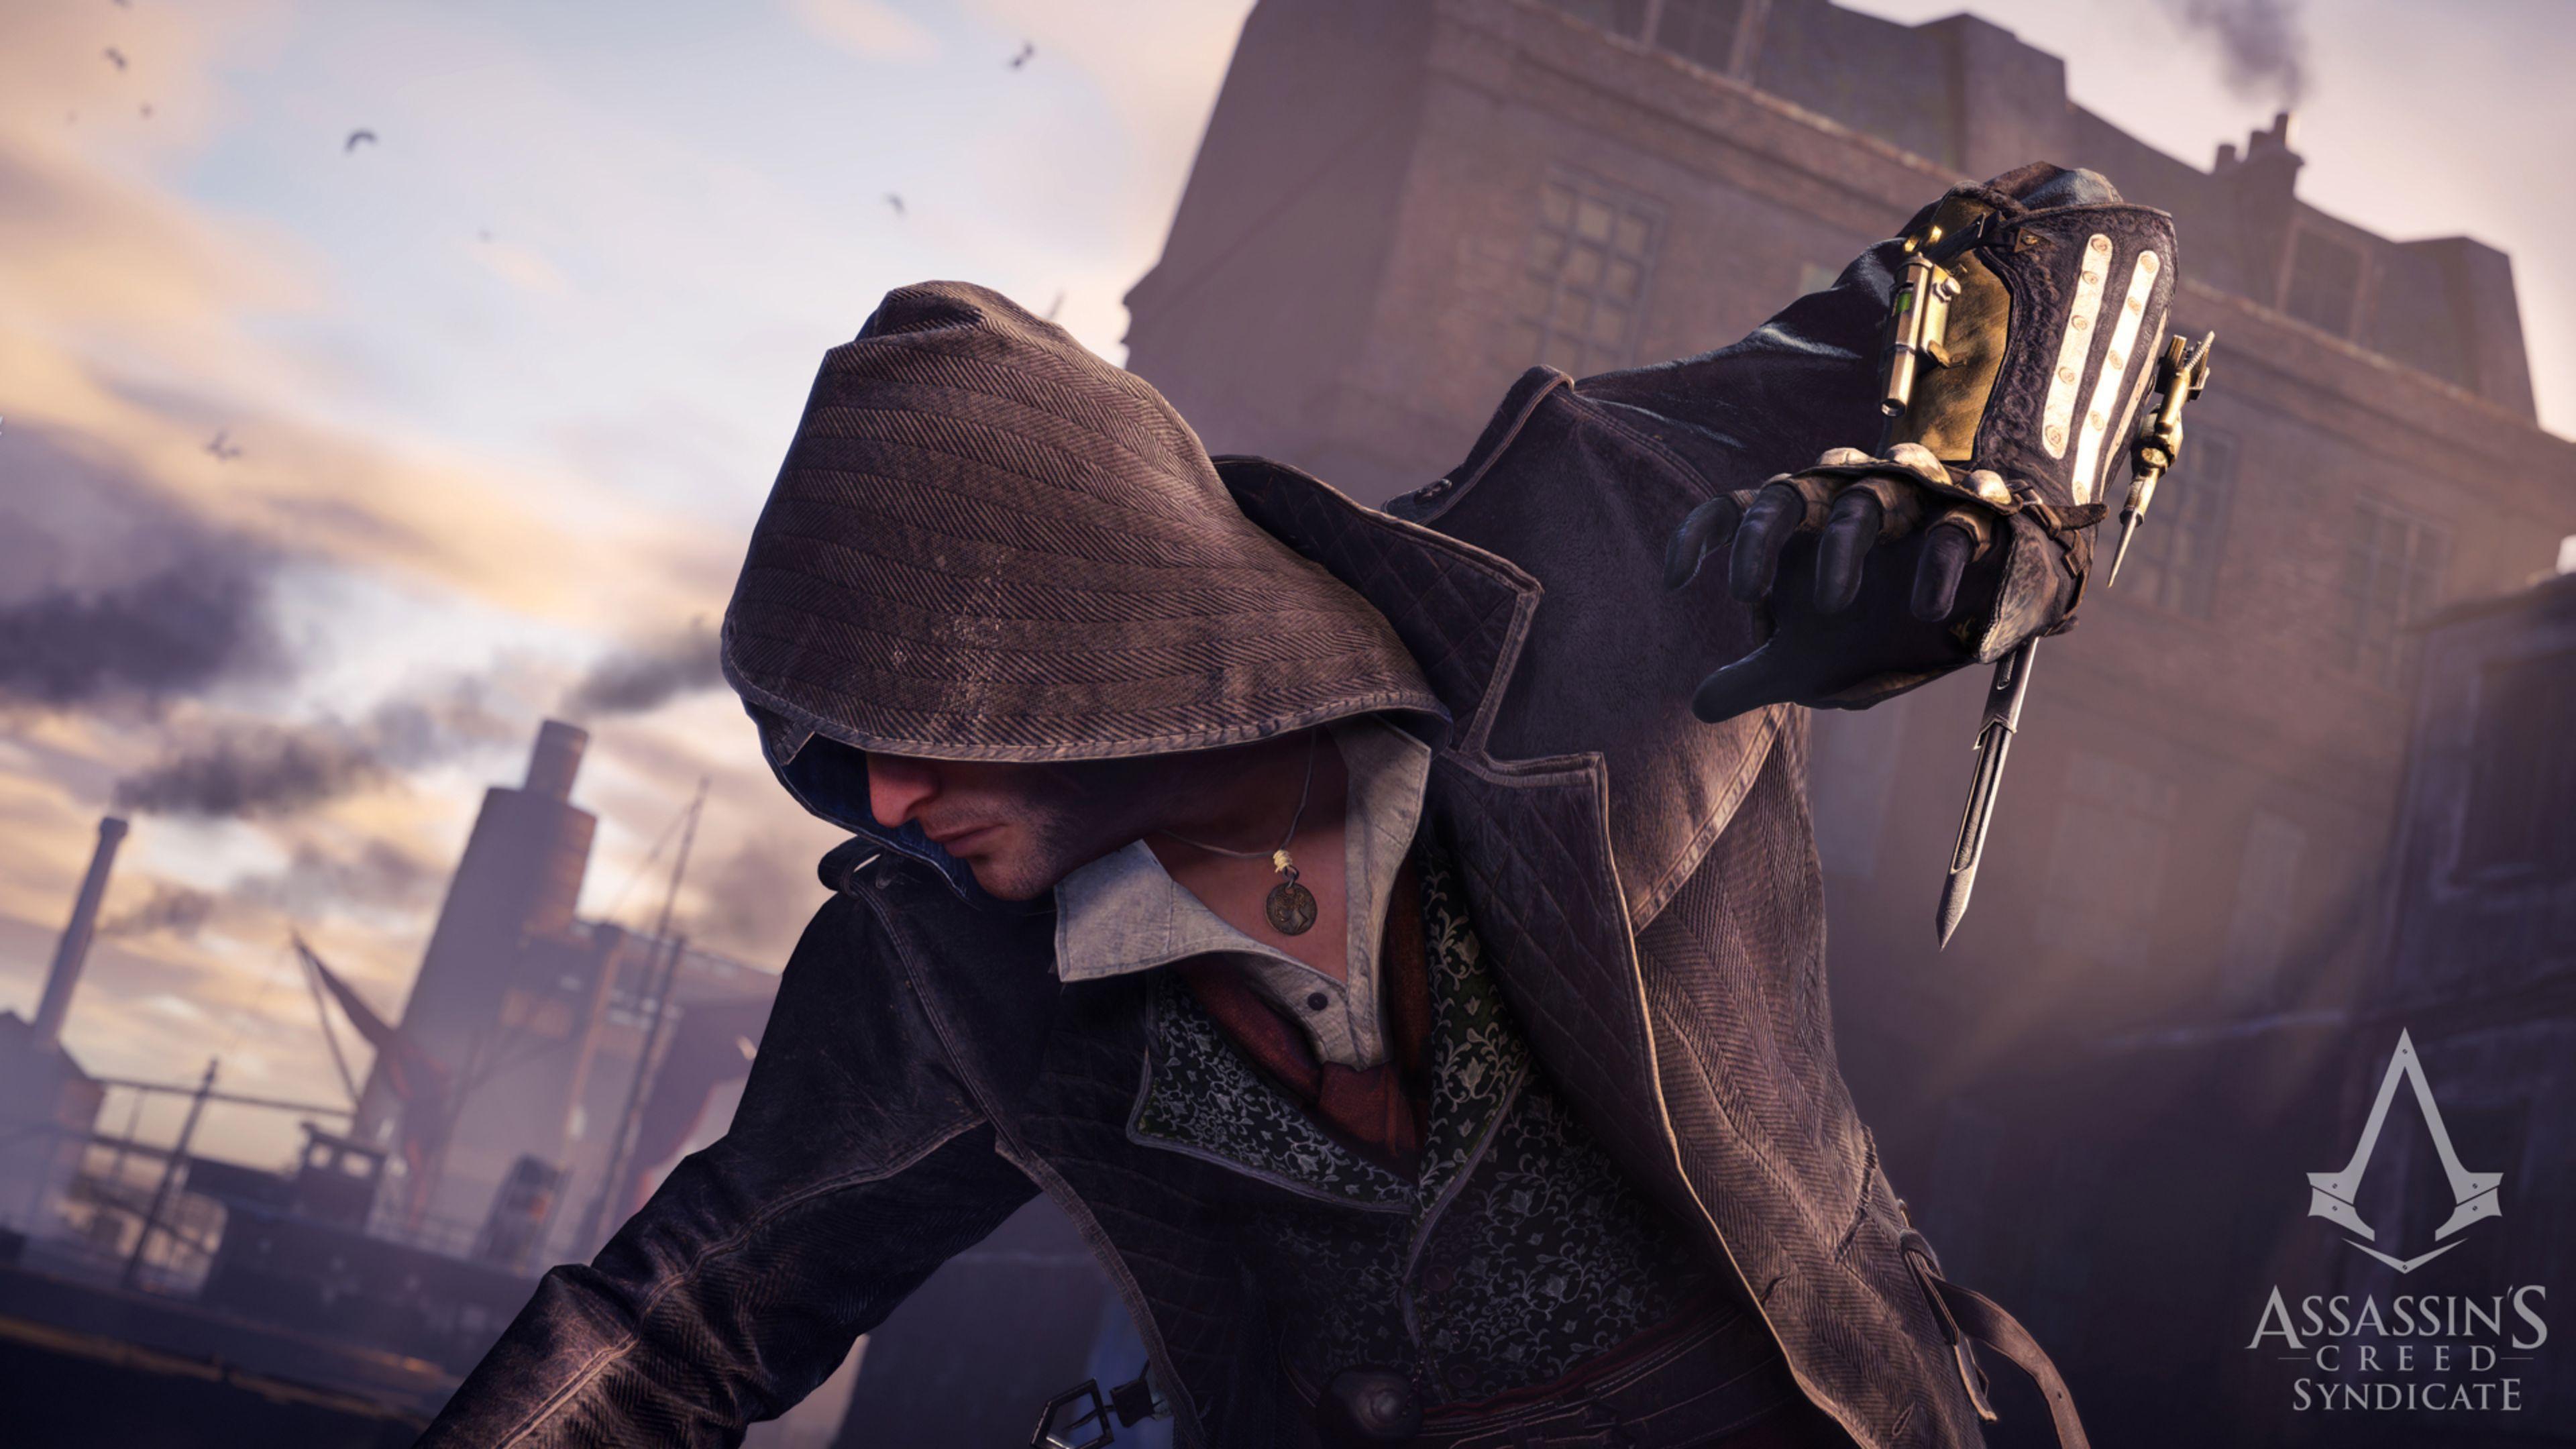 Single Player Assassin&;s Creed Syndicate 4K Wallpaper. Free 4K